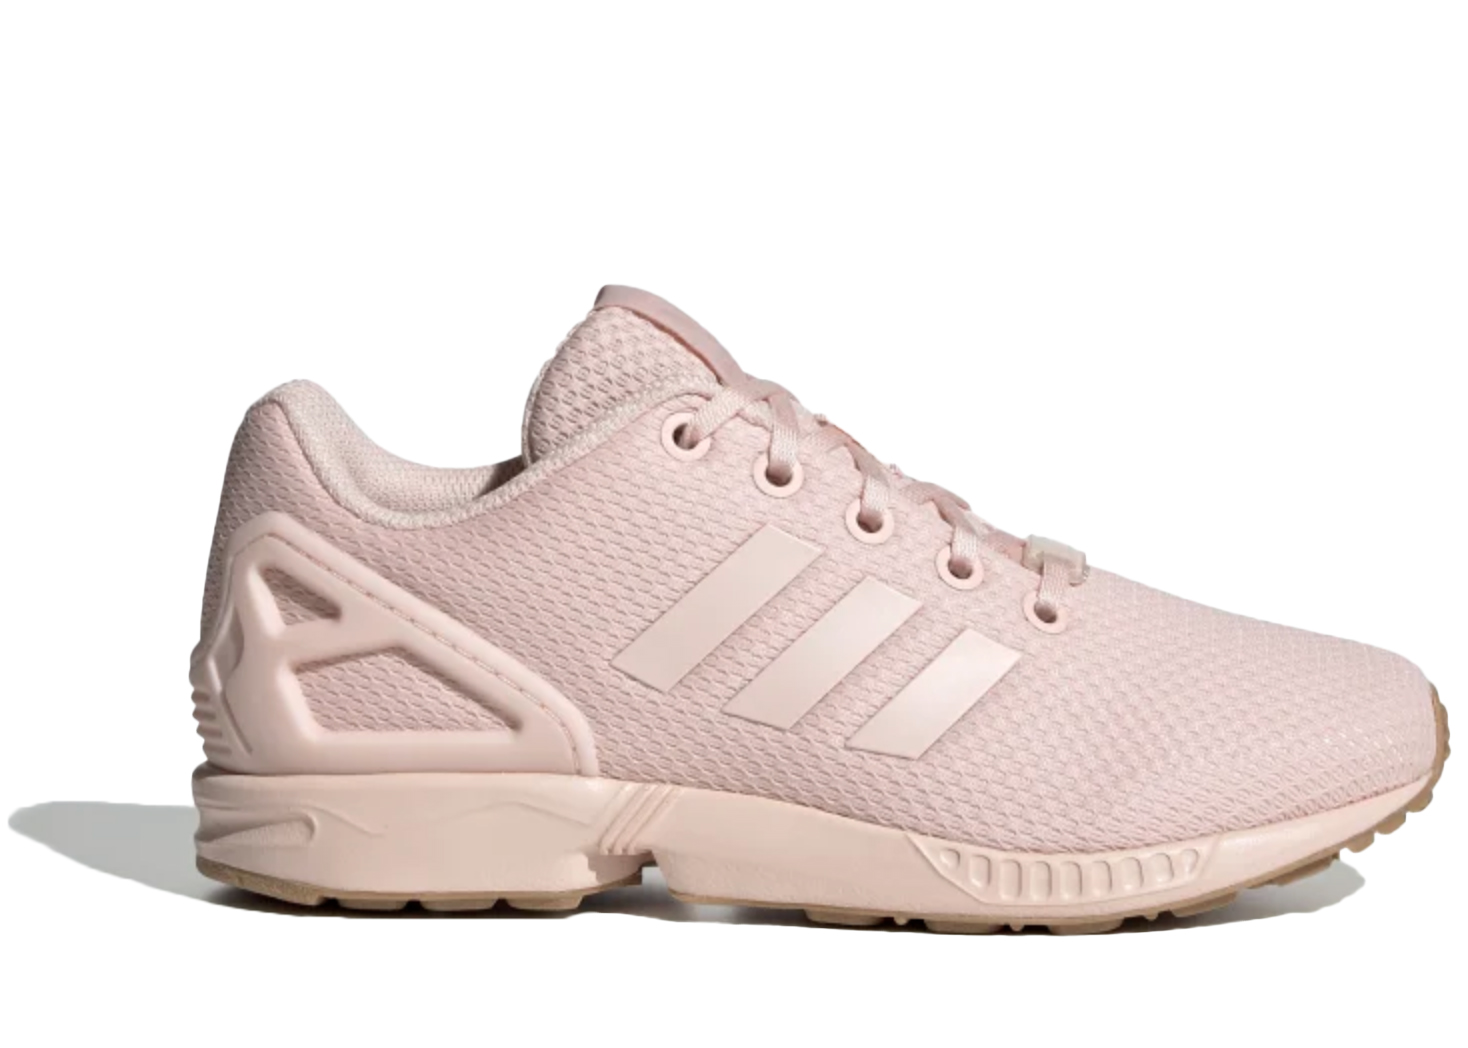 adidas ZX Flux Triple Icey Pink (GS)